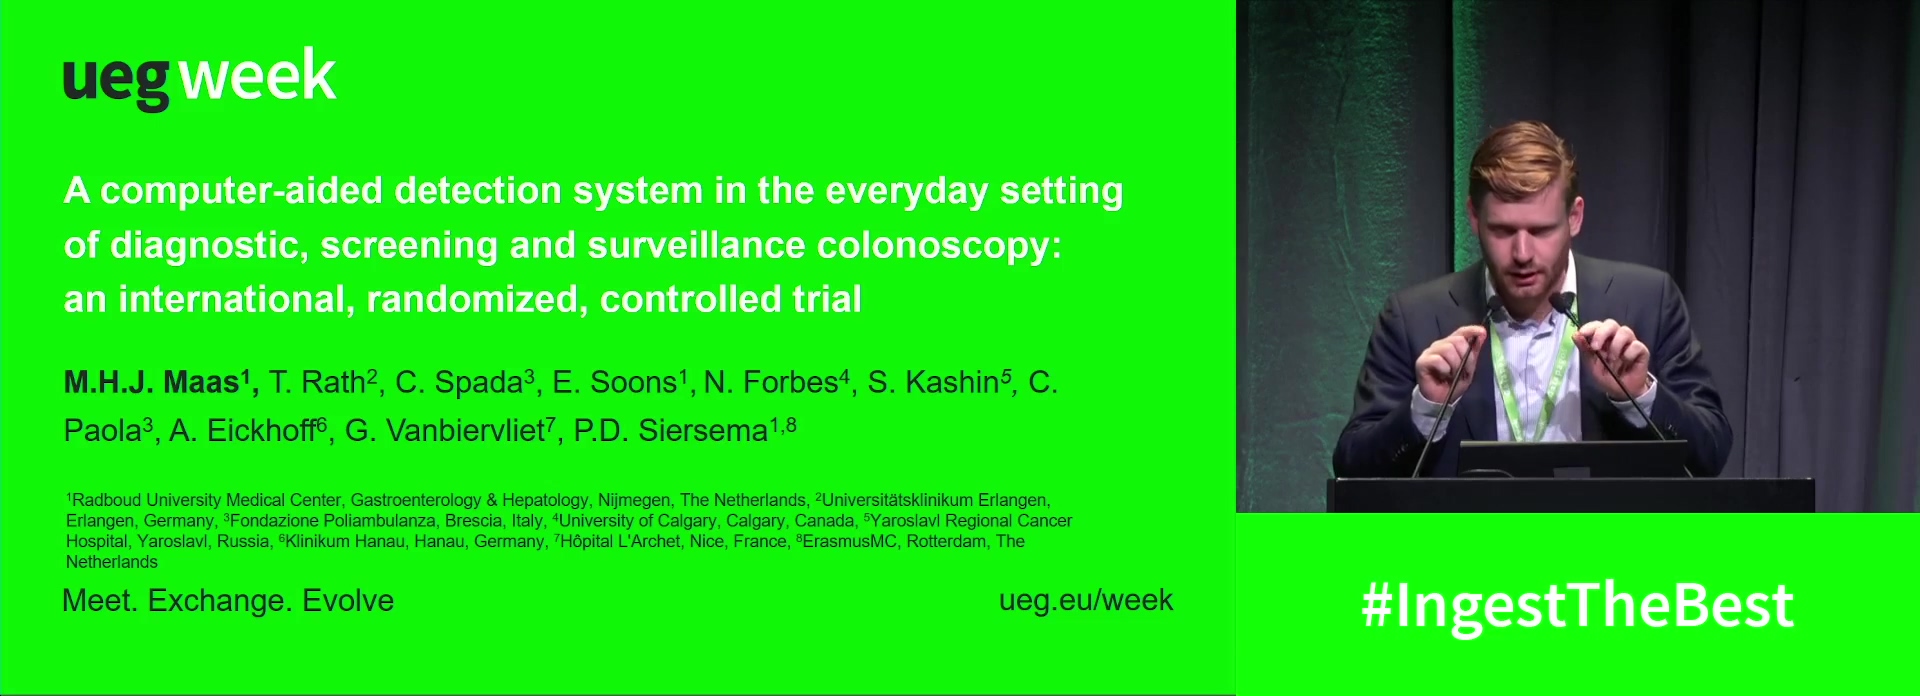 A COMPUTER-AIDED DETECTION SYSTEM IN THE EVERYDAY SETTING OF DIAGNOSTIC, SCREENING AND SURVEILLANCE COLONOSCOPY: AN INTERNATIONAL, RANDOMIZED TRIAL